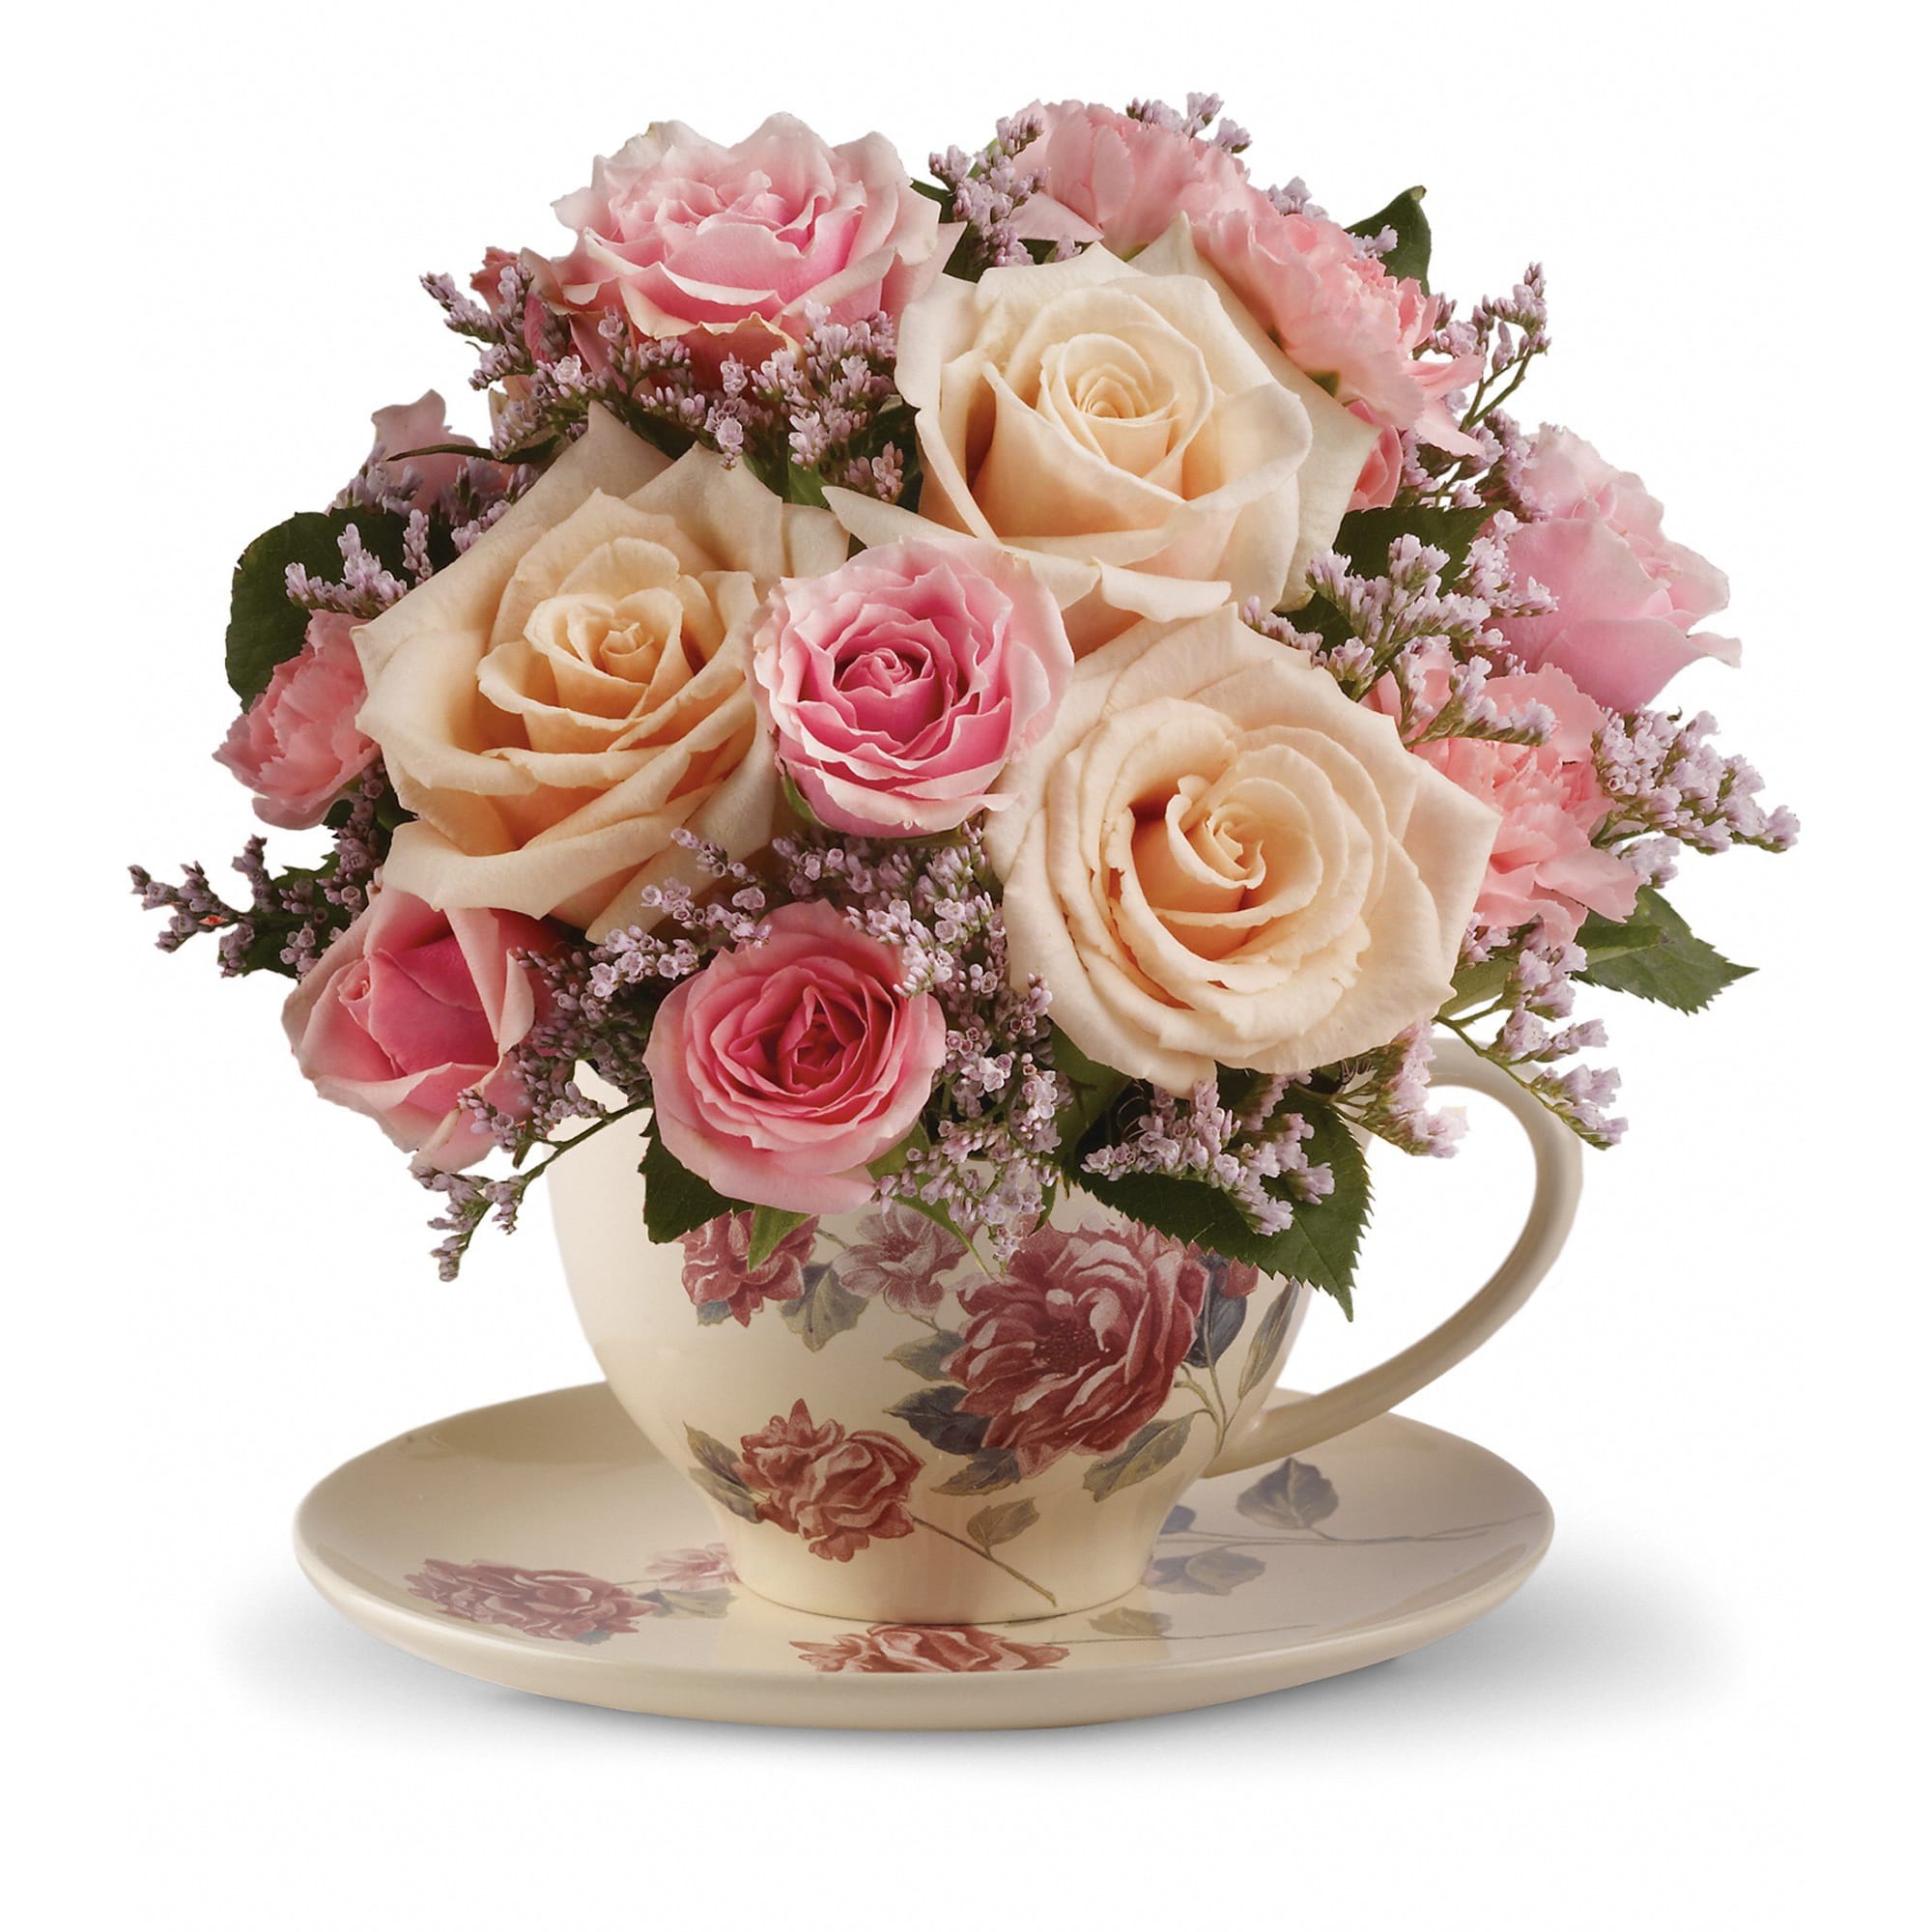 Teleflora's Victorian Teacup Bouquet - Send warm wishes with this lovely gift bouquet that arrives in a ceramic teacup. This charming, old-fashioned bouquet features pink and crÃ¨me roses. 